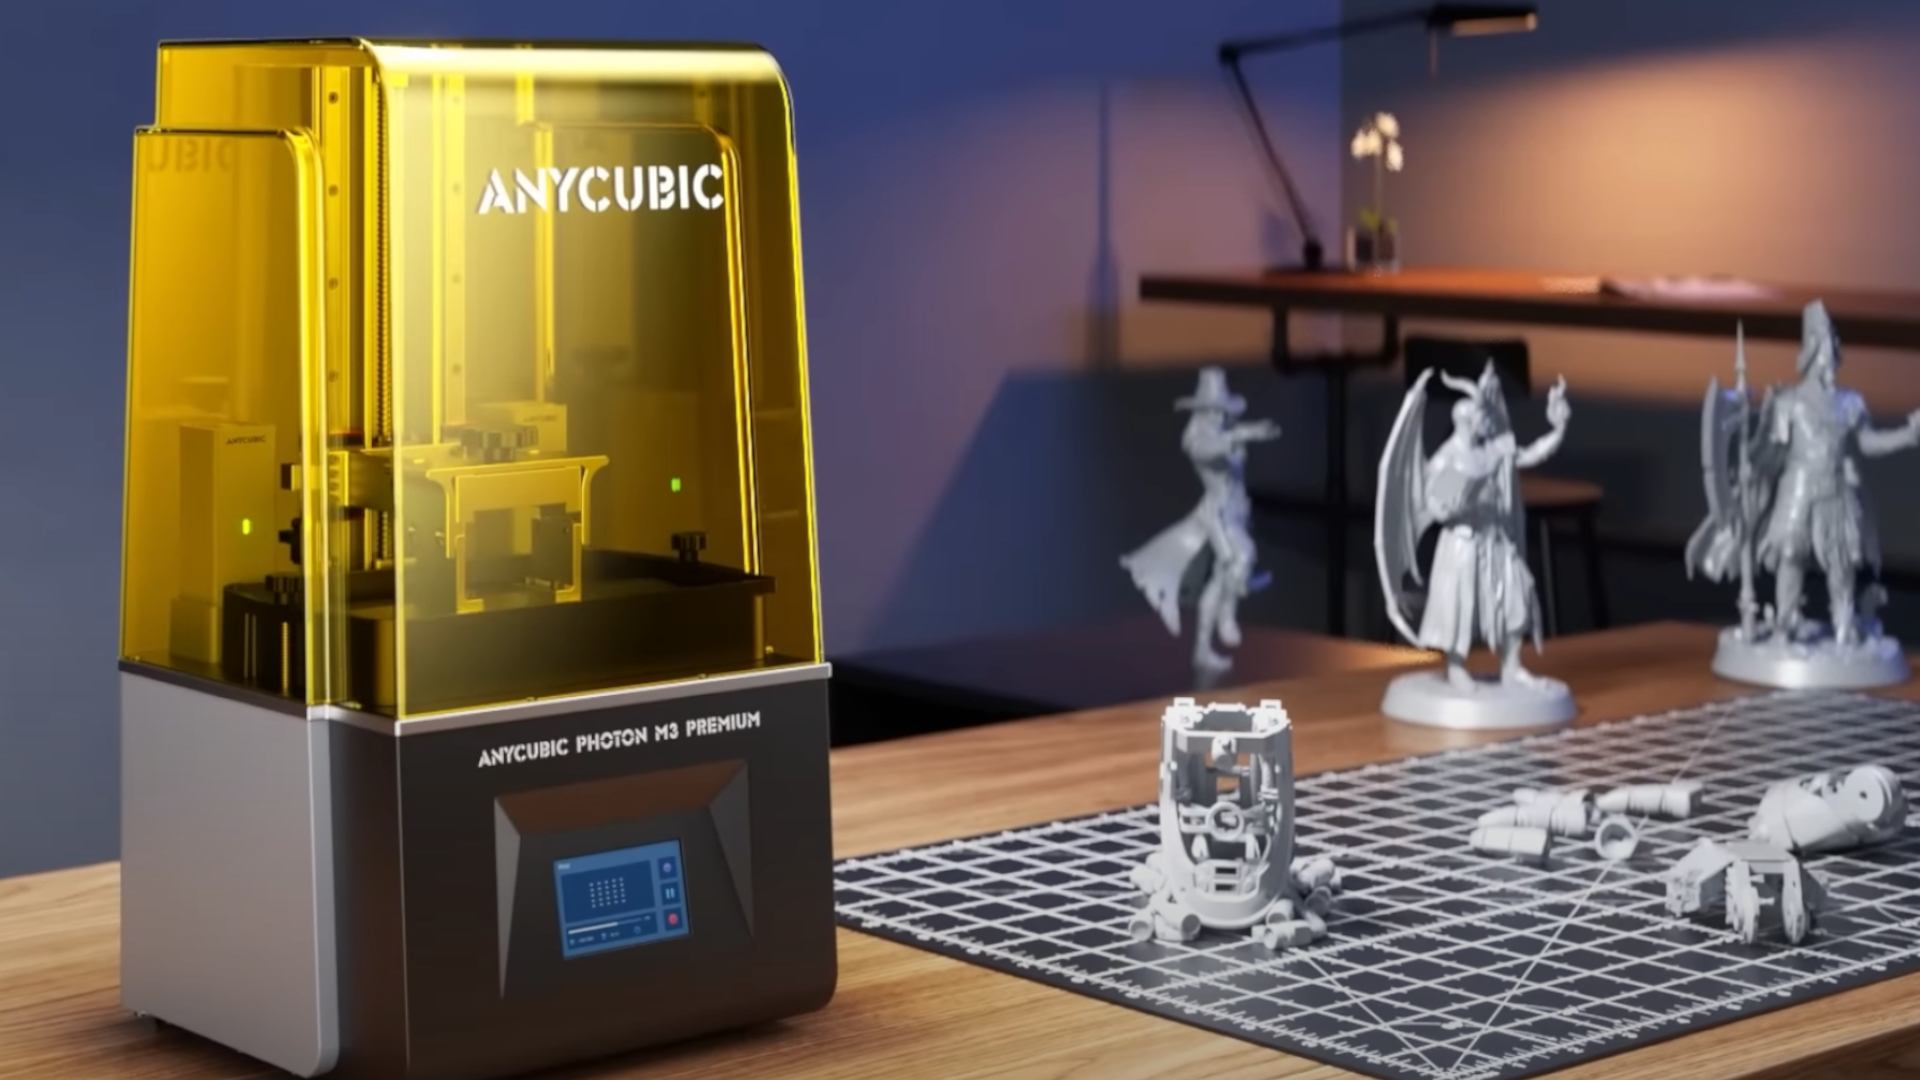 ANYCUBIC - “The level of quality that the Anycubic Photon